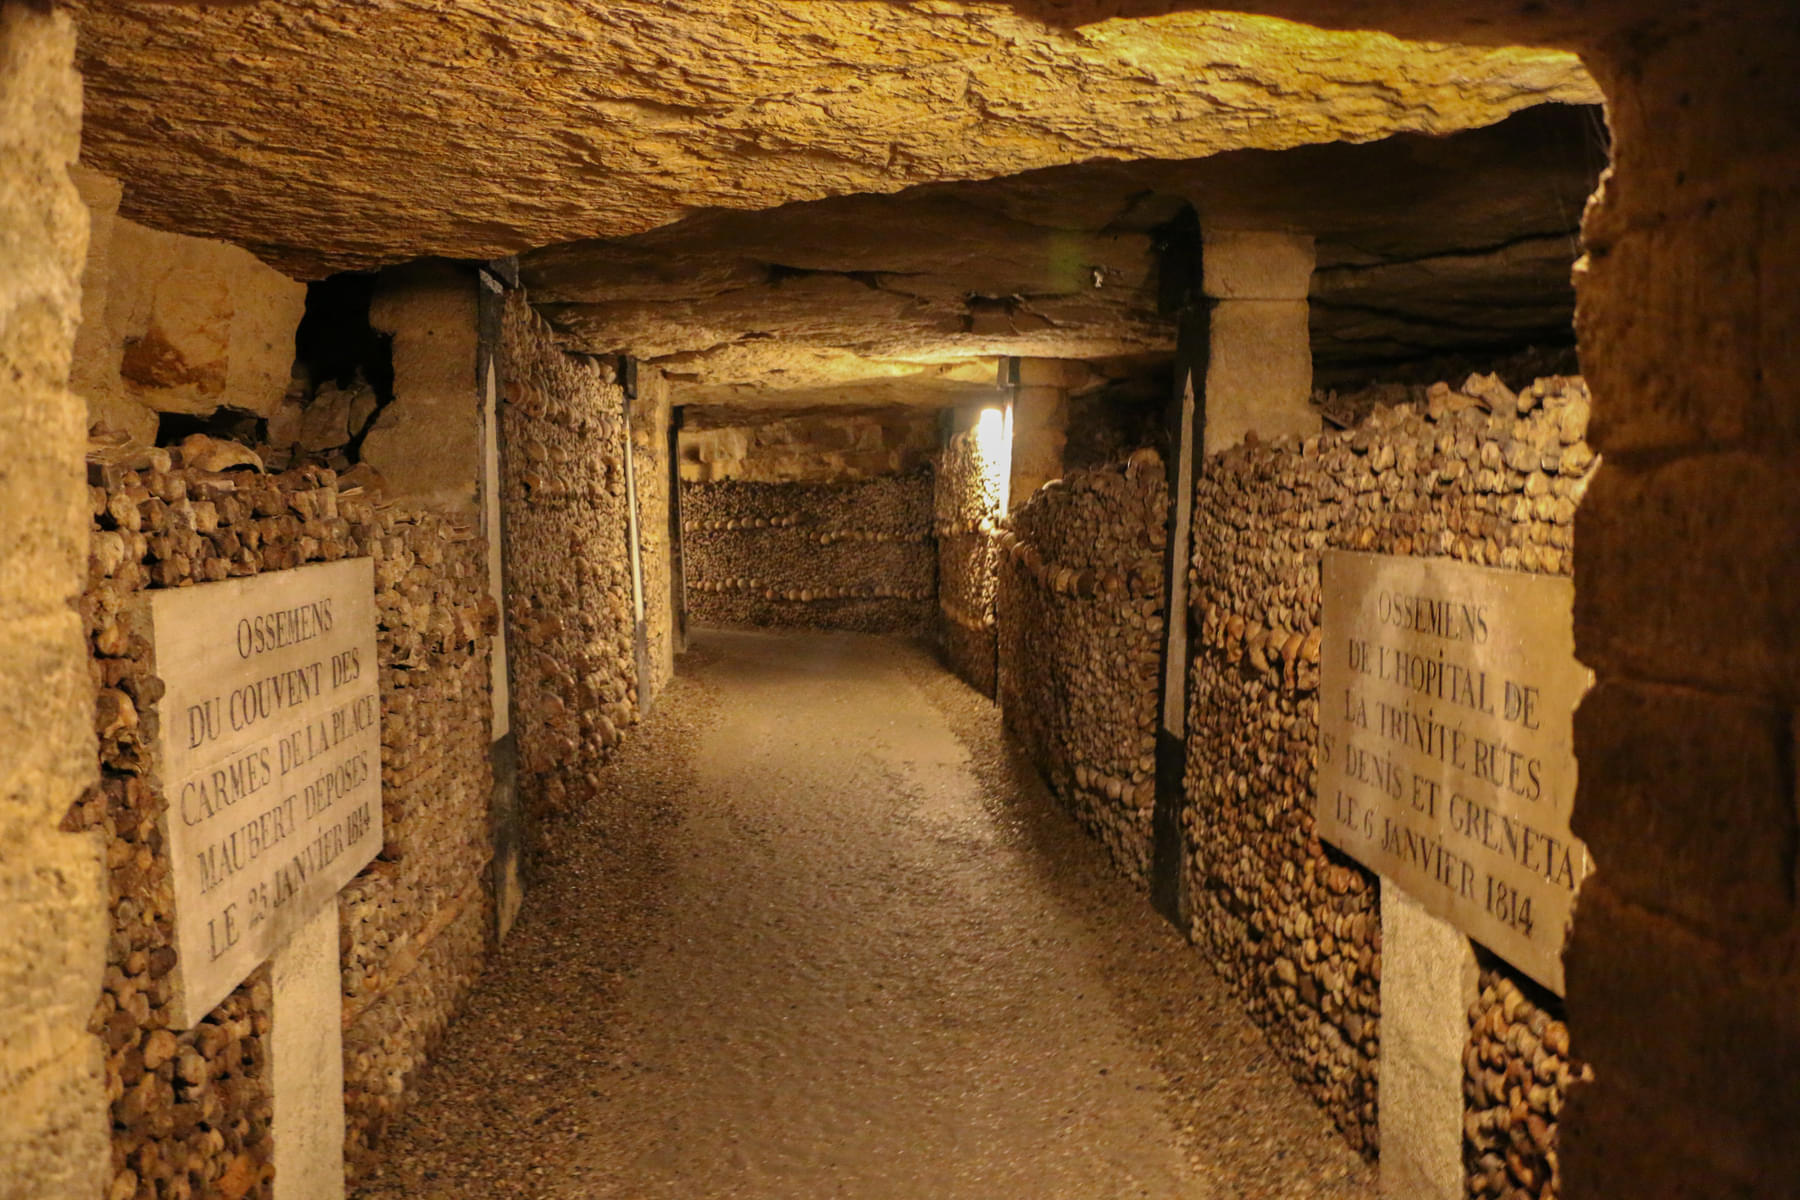 See the incredible and complex Catacombs, dug during the Middle Ages